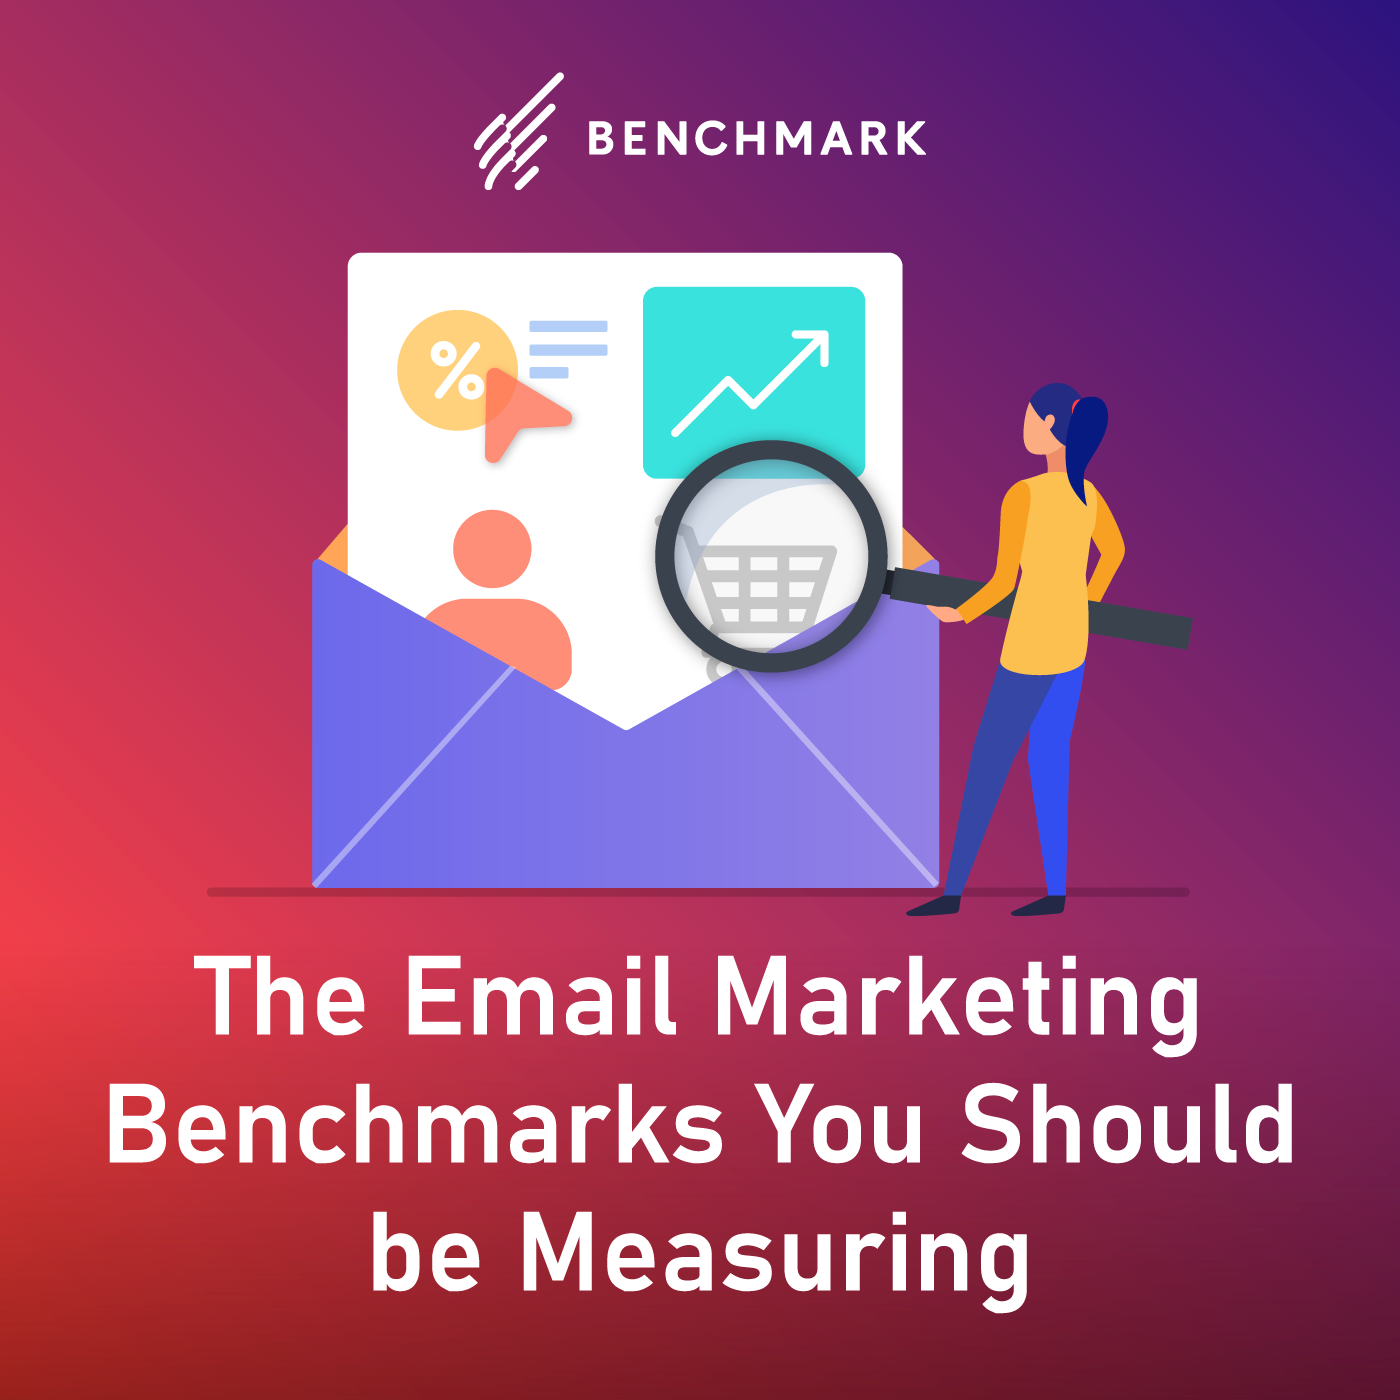 The Email Marketing Benchmarks You Should be Measuring